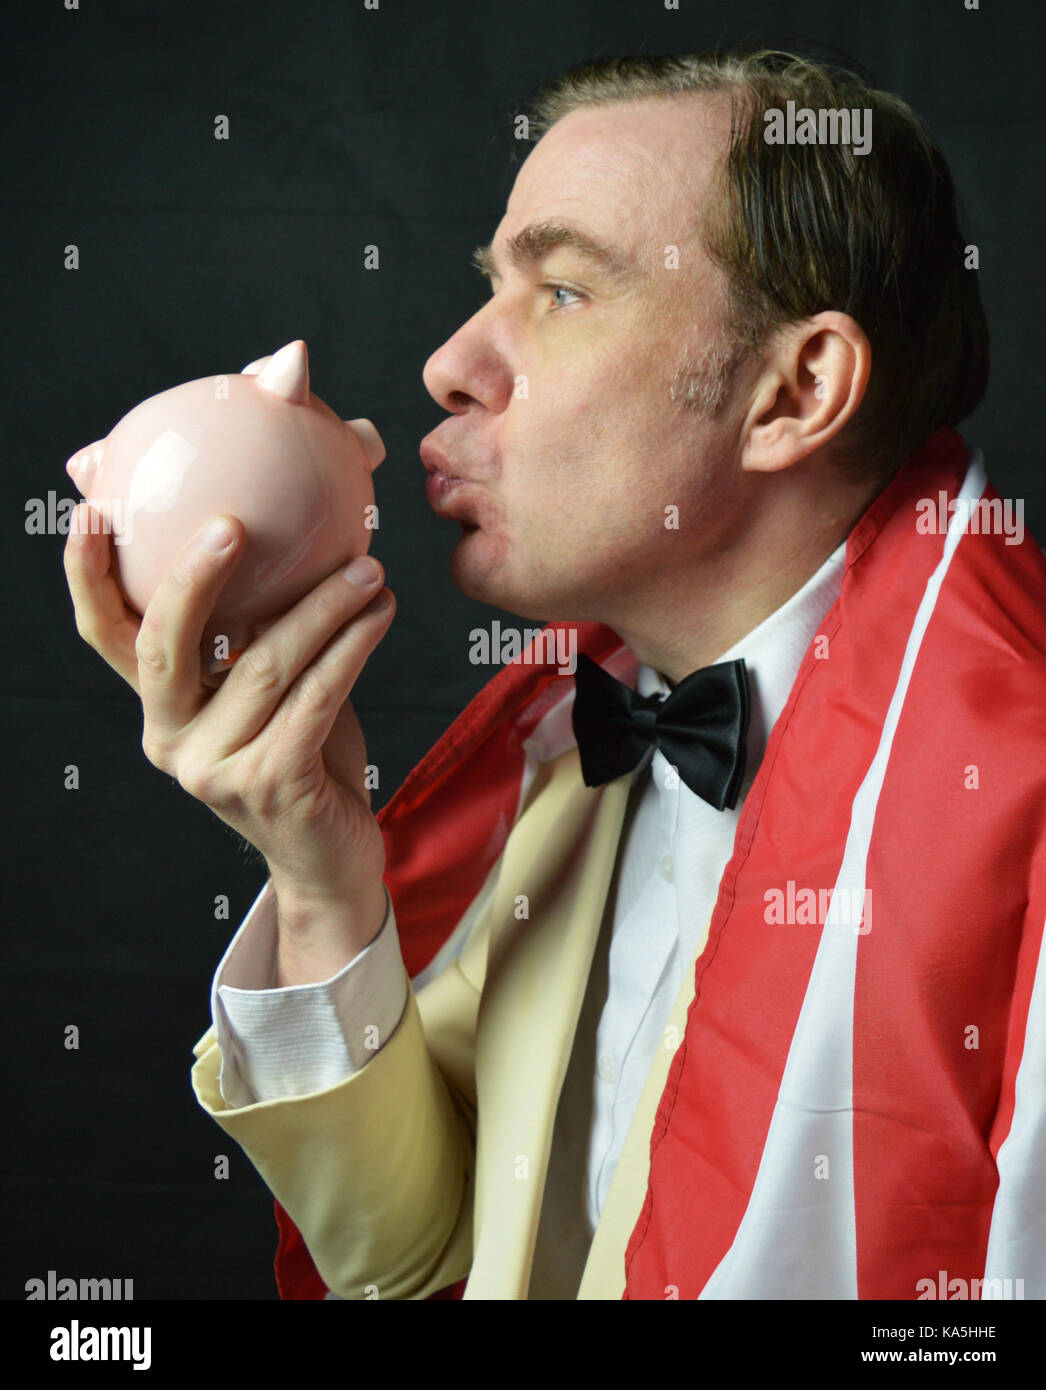 American Politician with flag Stock Photo